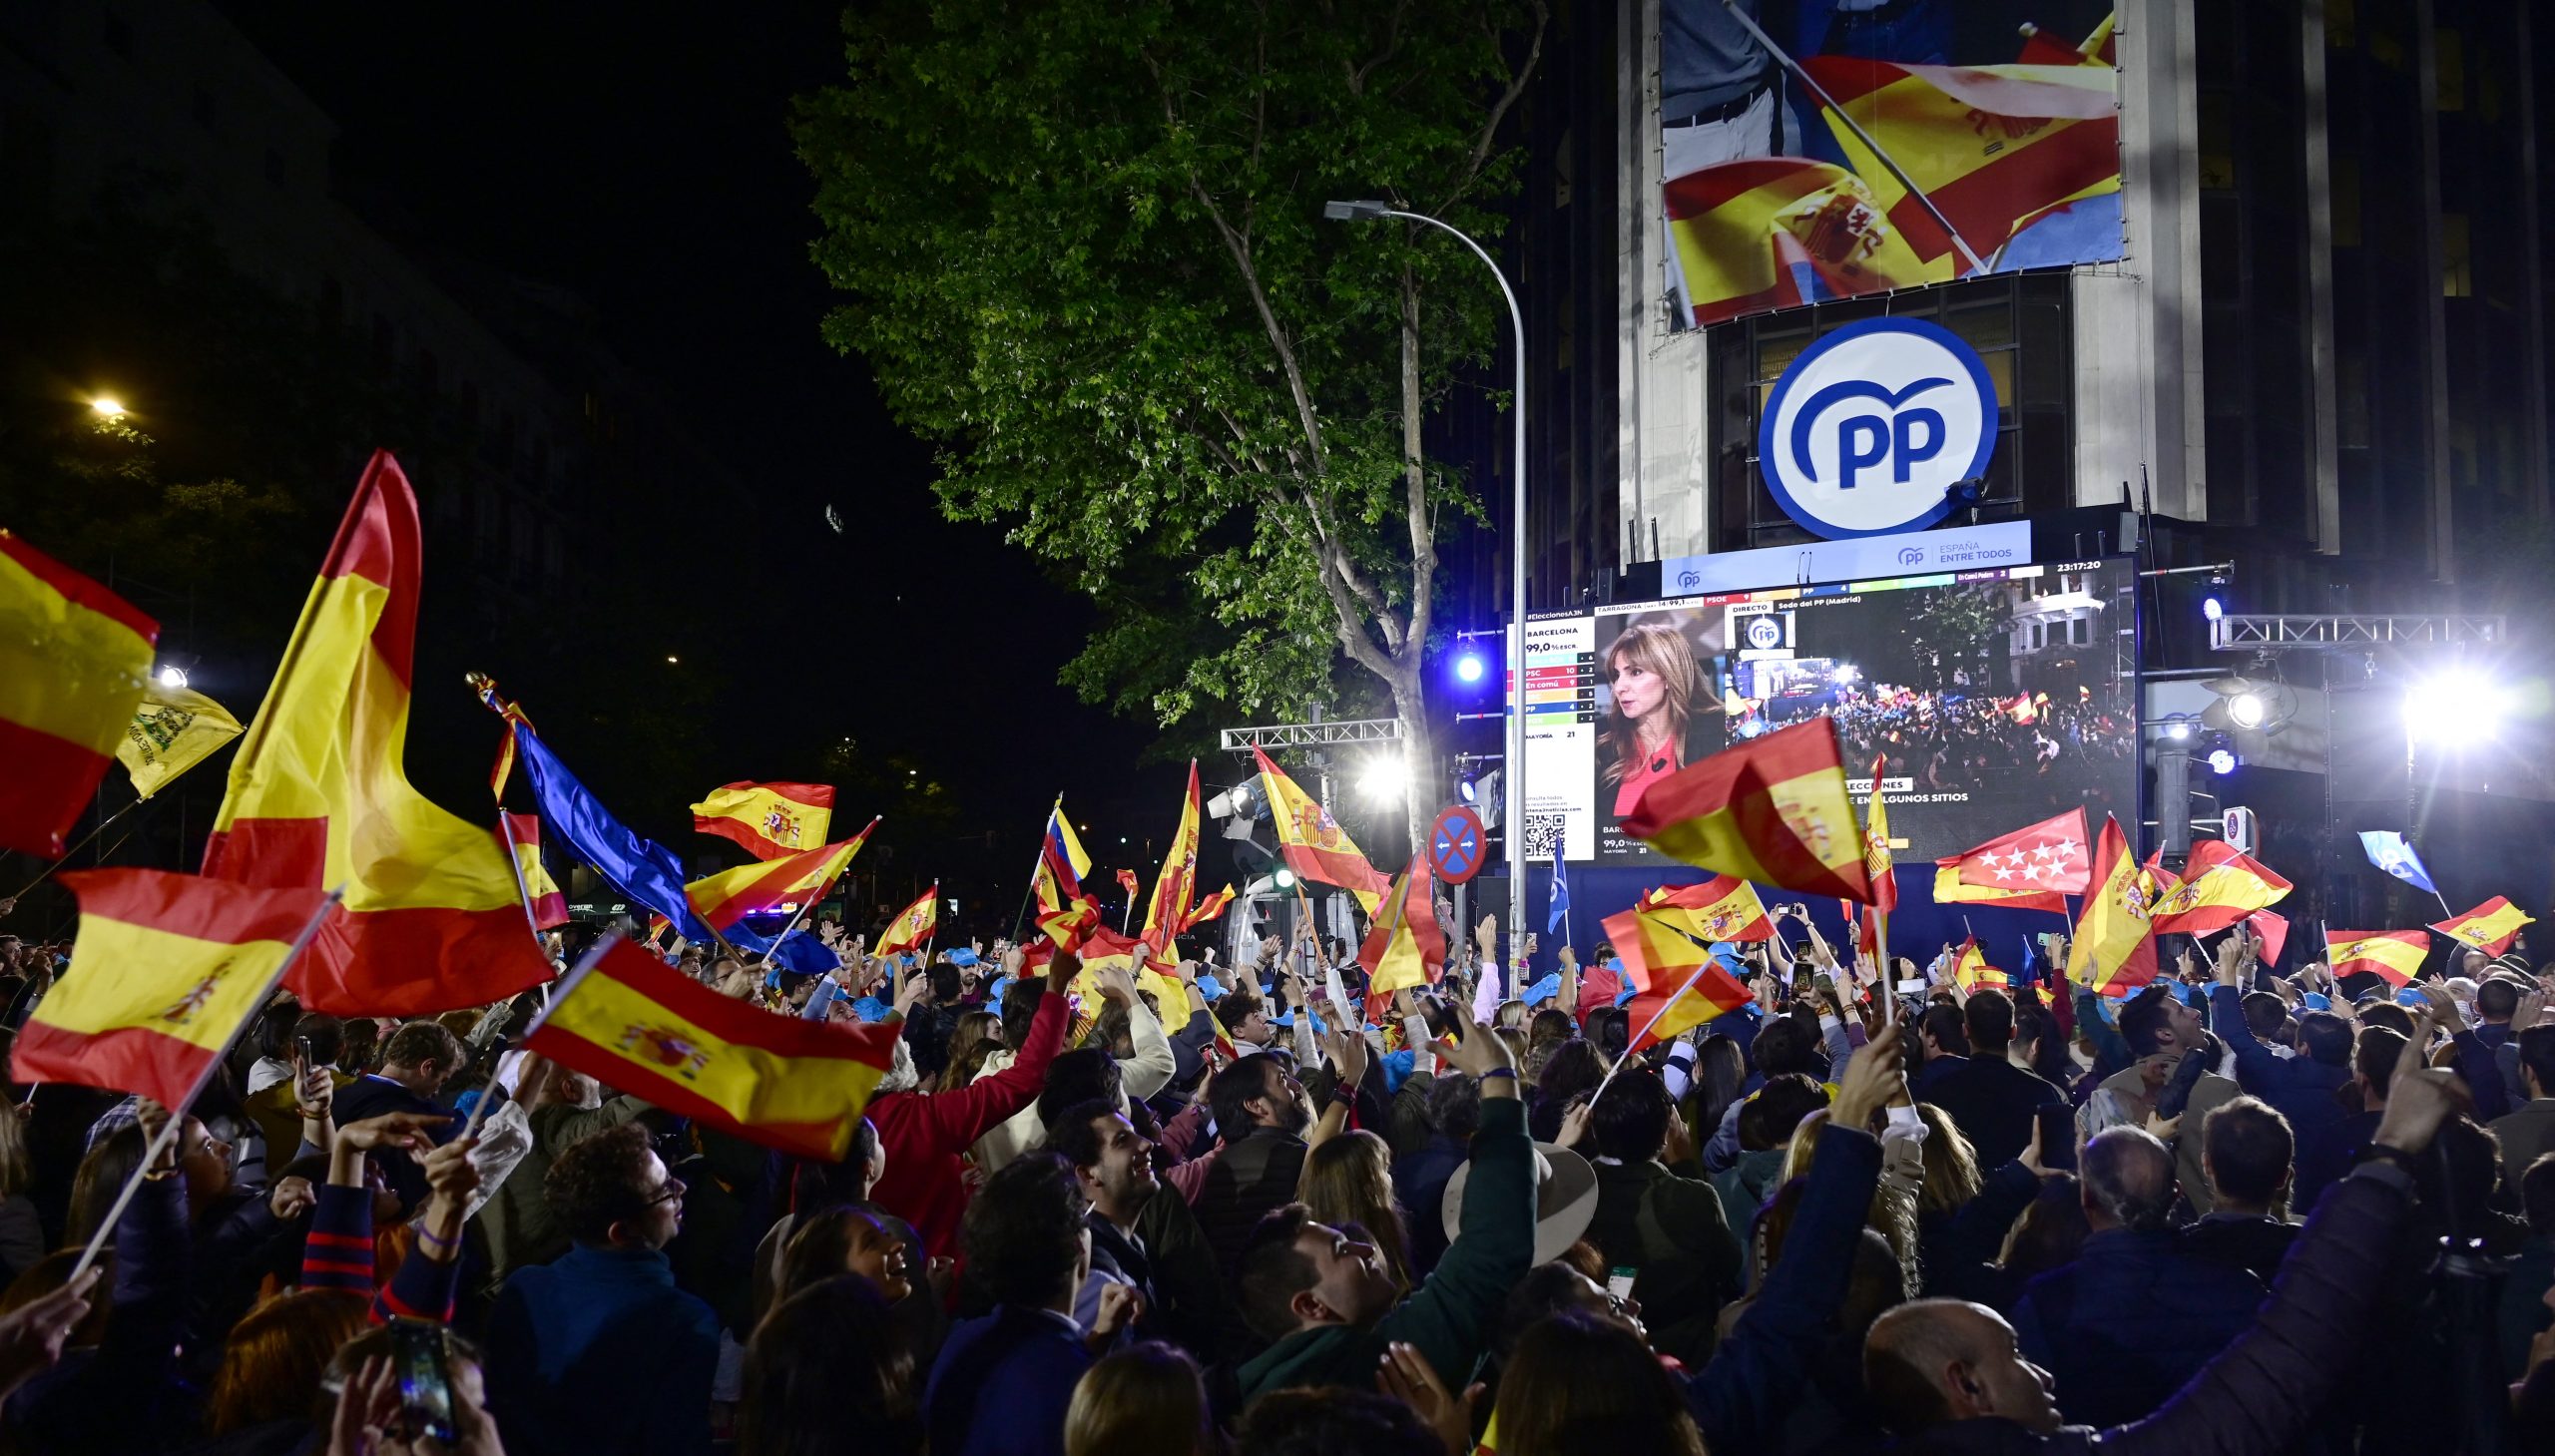 Popular Party (PP) supporters gather to celebrate the polls result outside the party headquarters in Madrid on May 28, 2023 after the local and regional elections held in Spain. Spain’s right-wing opposition posted strong gains both locally and regionally following today’s polls in a clear setback for Socialist Prime Minister Pedro Sanchez, initial results and media reports said.  At a local level, the main opposition Popular Party secured the largest number of votes with 90 percent of the ballots counted, while the Socialists lost several regions they held, notably Valencia, media reports said. (Photo by JAVIER SORIANO / AFP)